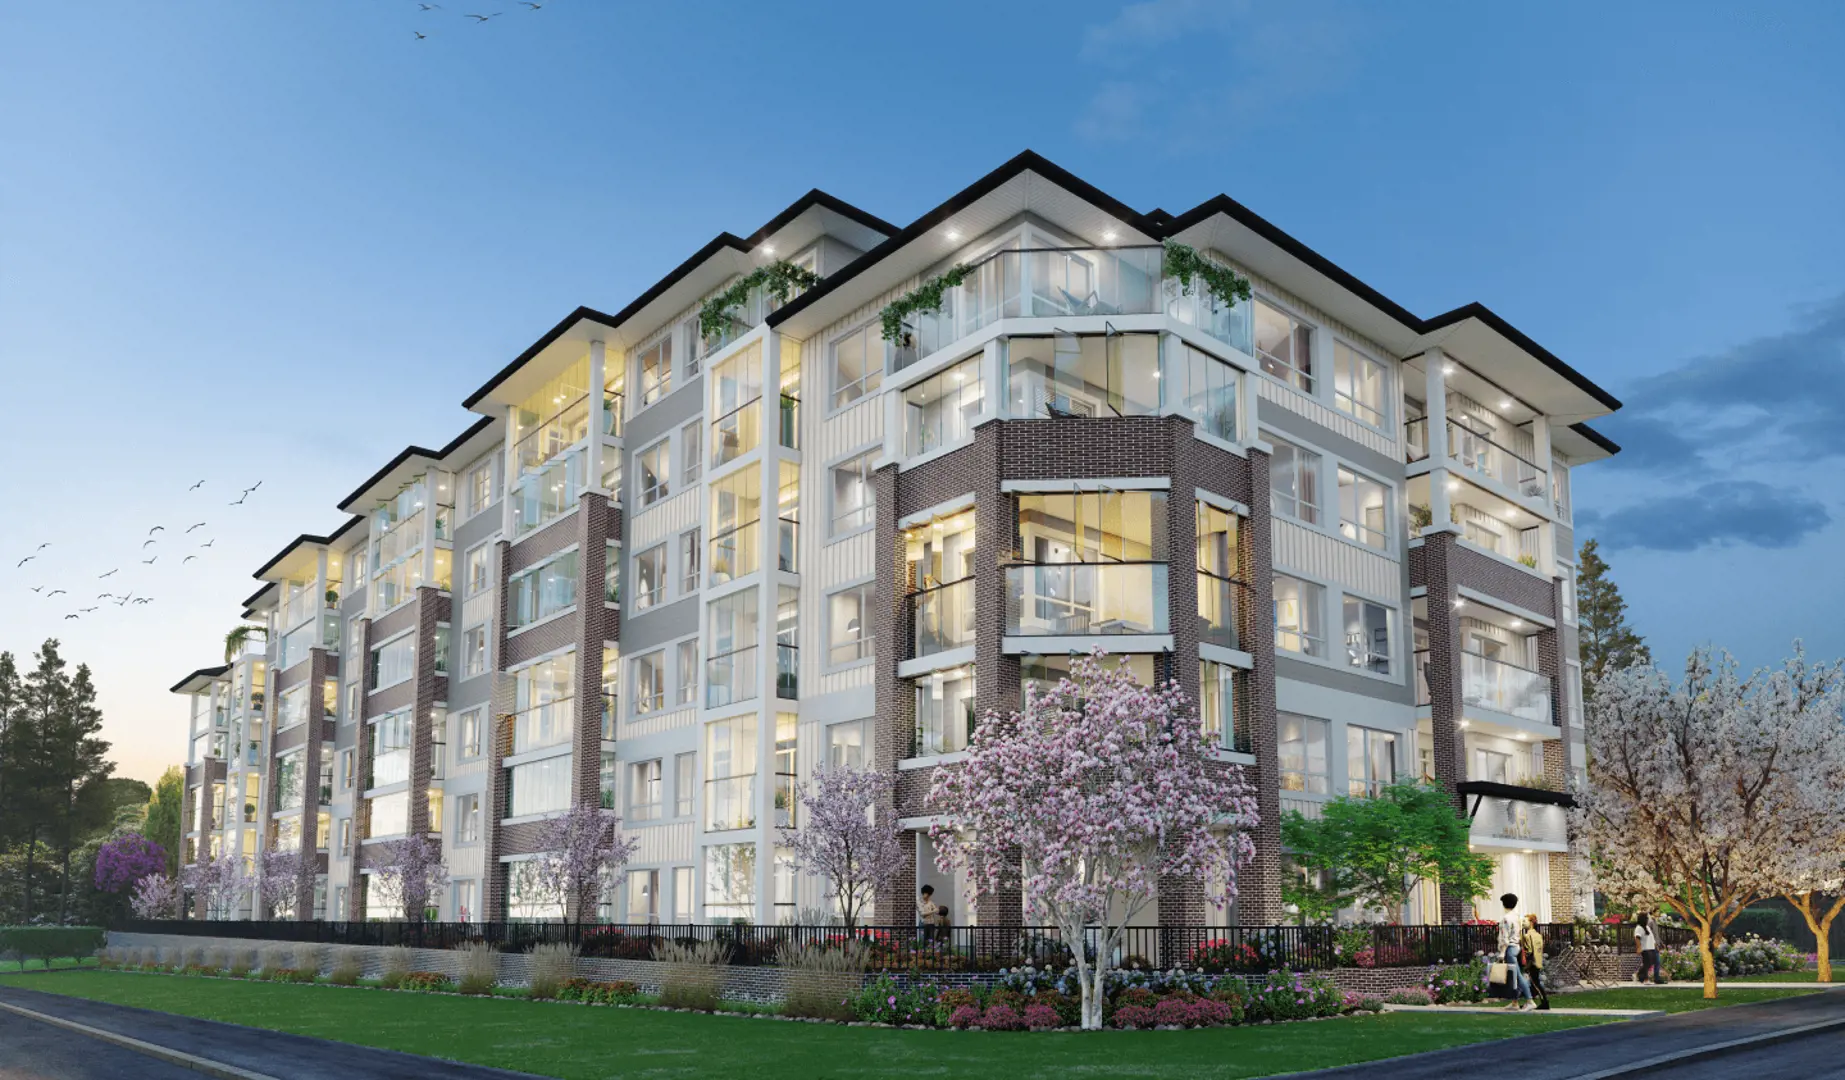 Hailey by Brimming Development is a new mid-rise condominium project in Maple Ridge.